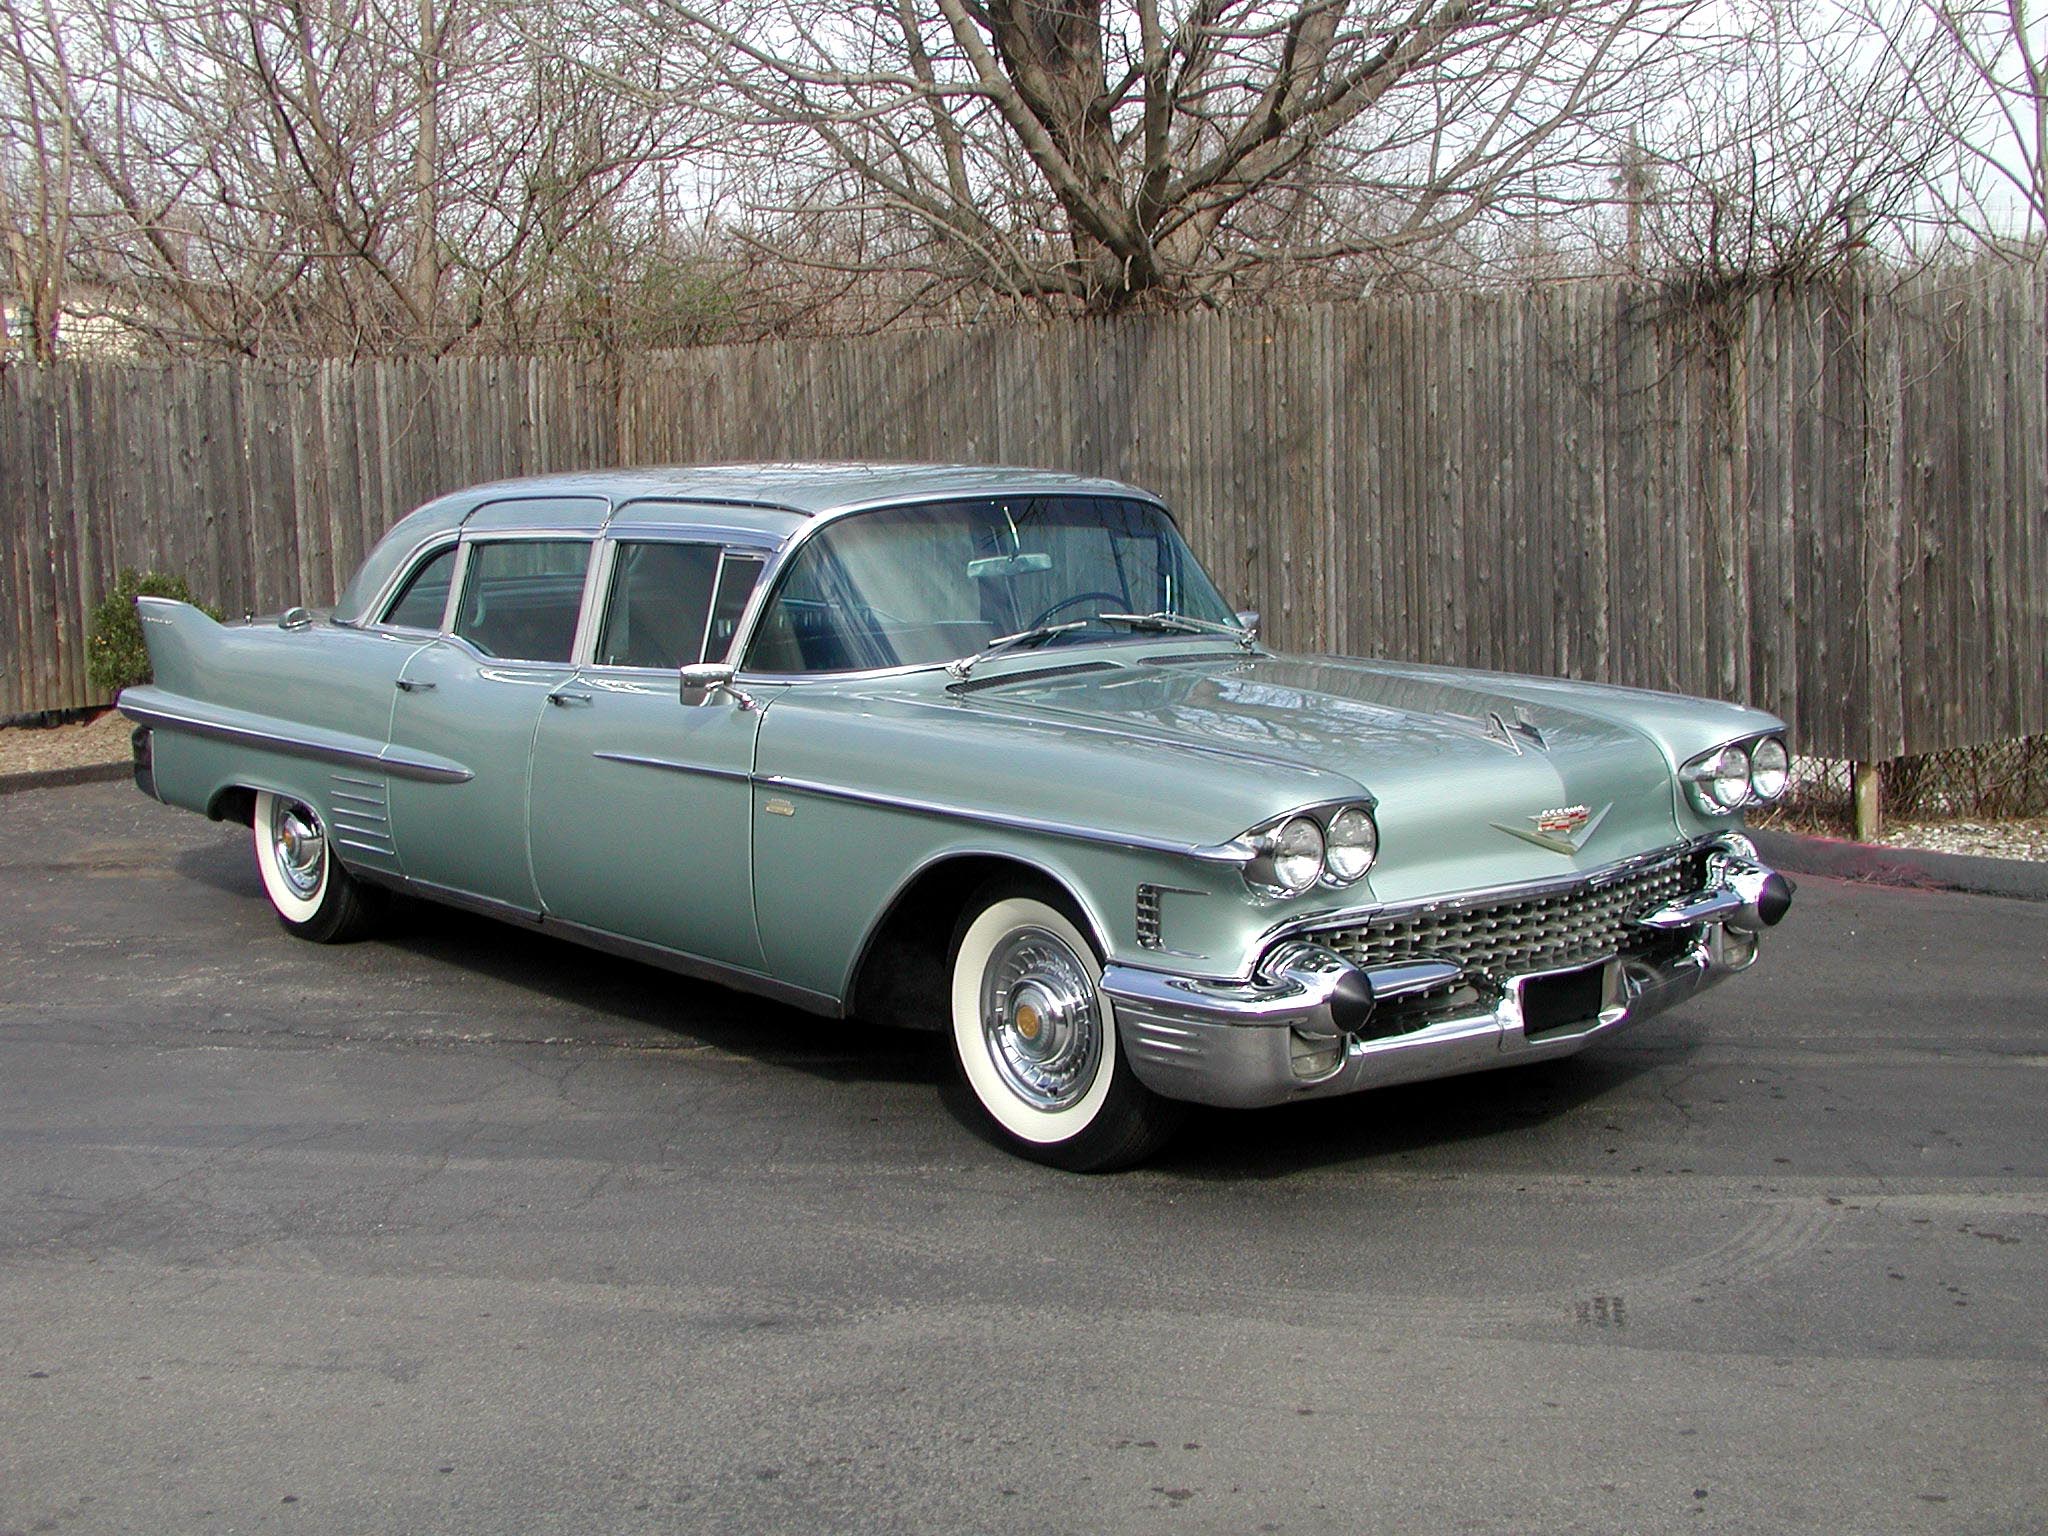 1958 cadillac fleetwood series 75 imperial